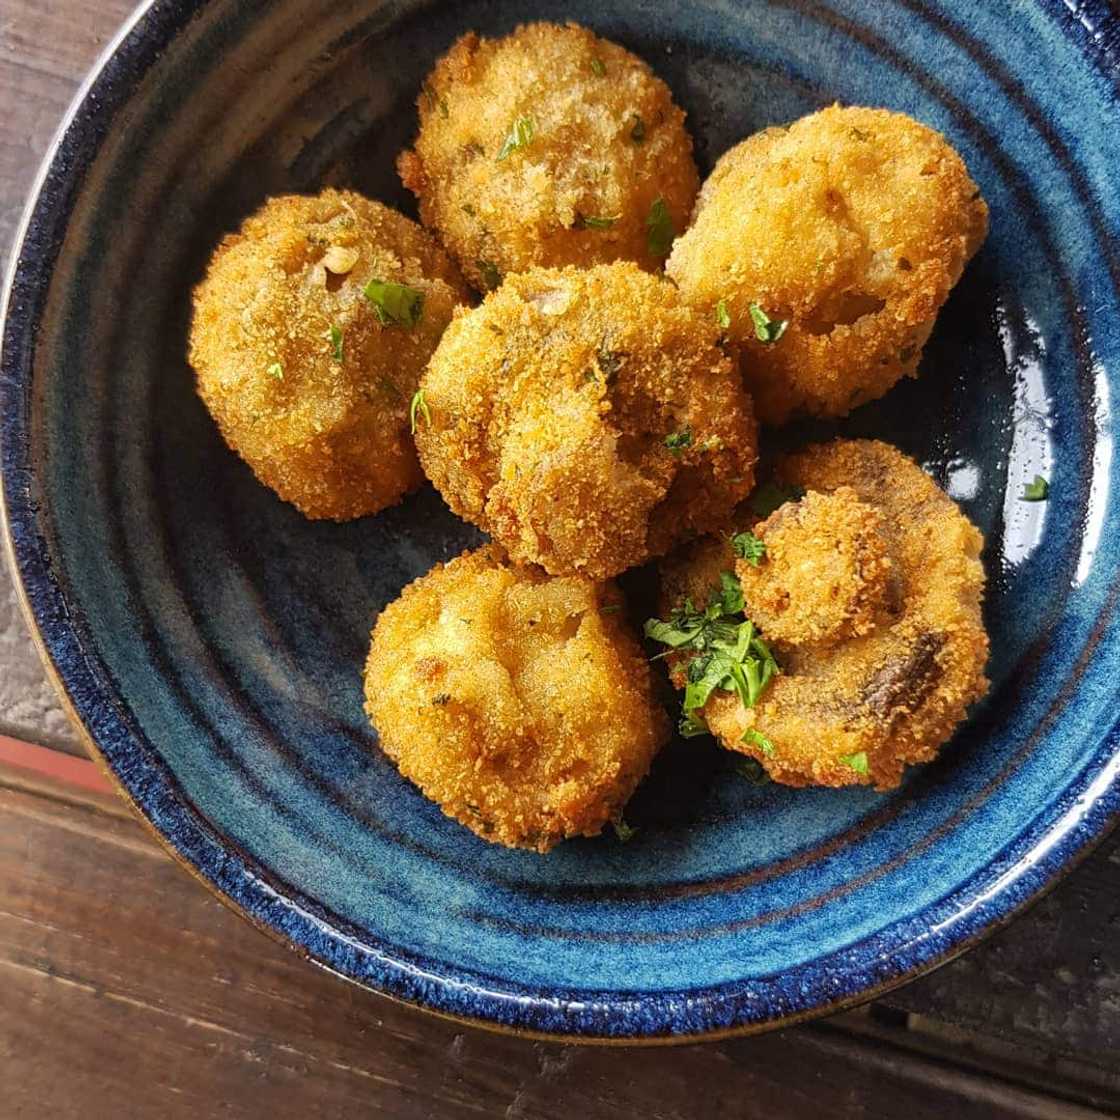 How to make crumbed mushrooms in South Africa